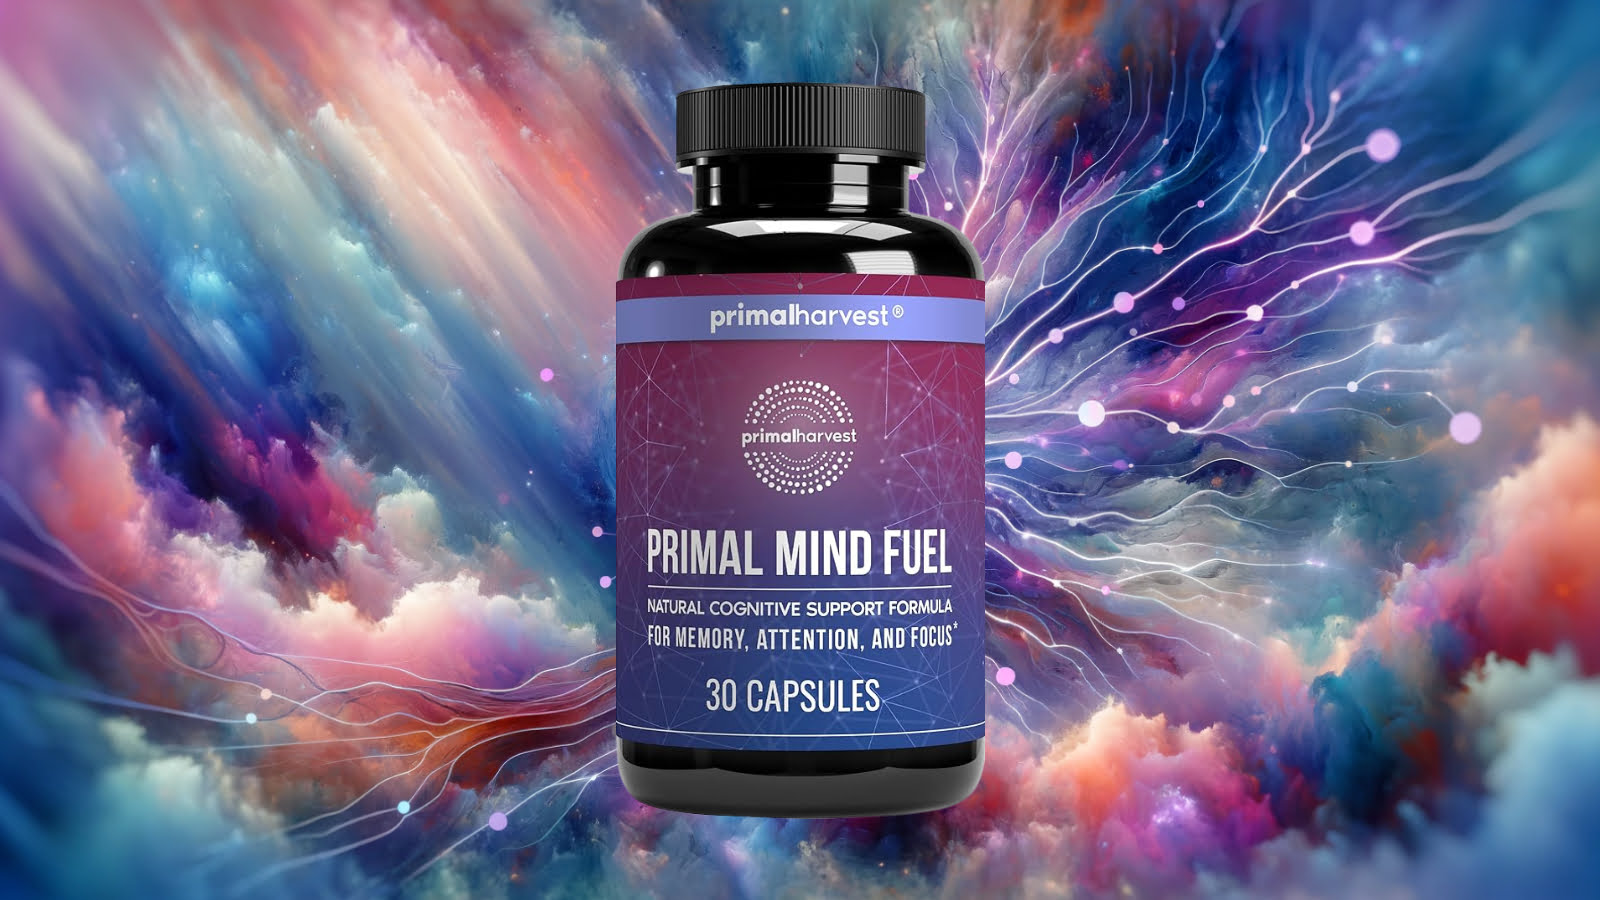 Article overview on the effectiveness and results of Primal Mind Fuel, focusing on cognitive enhancement and mental clarity.